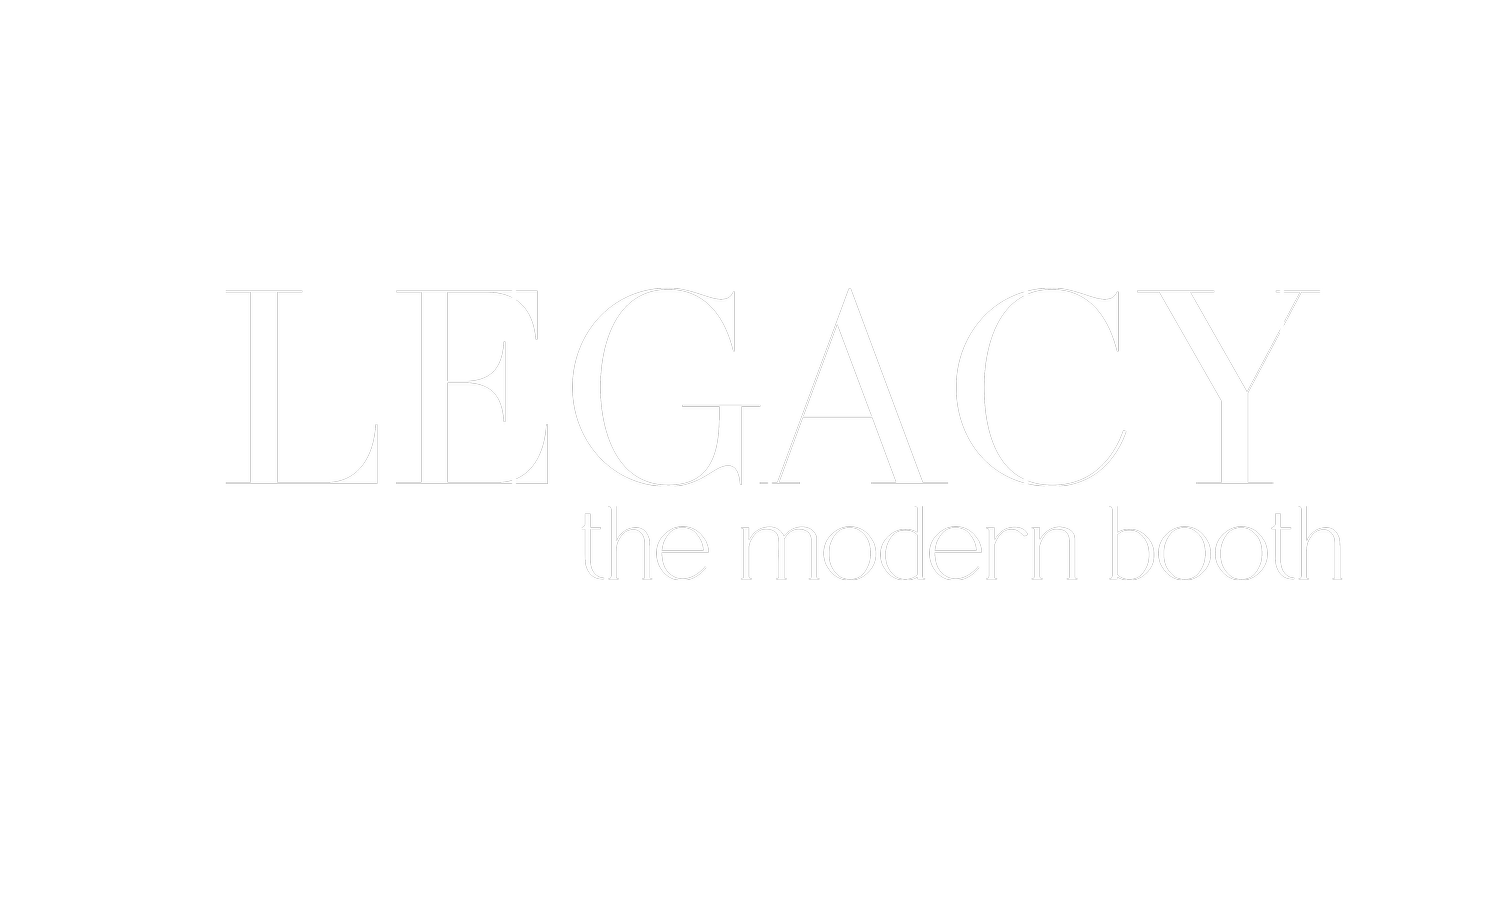 LEGACY the Modern Booth